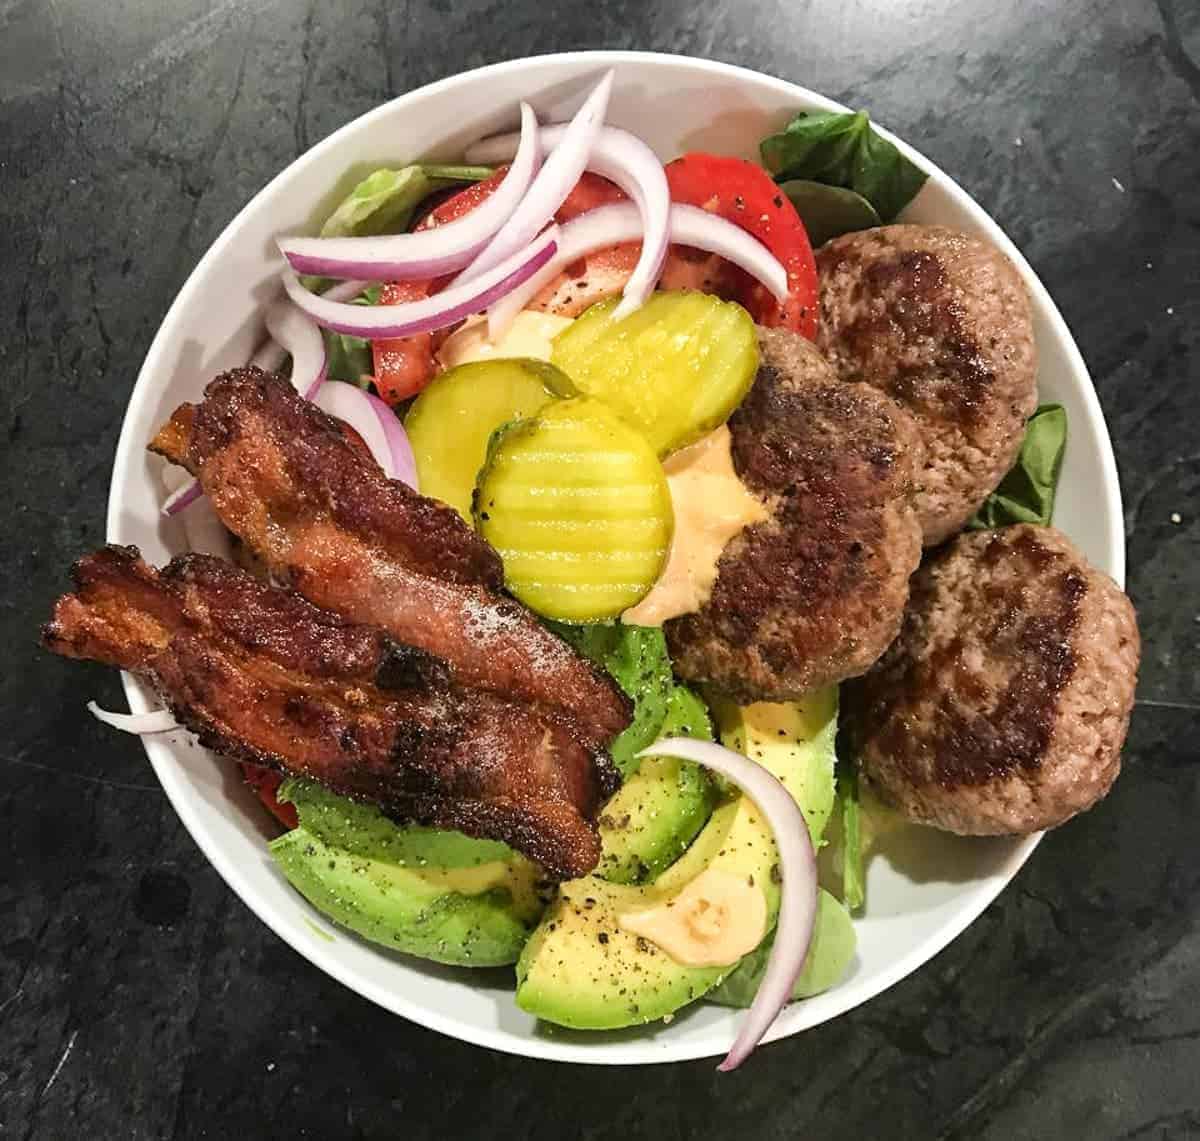 Ultimate Burger Bowl with mini burgers, bacon, pickles, fresh tomatoes, and a few handfulls of crispy lettuce. Plus the special sauce.